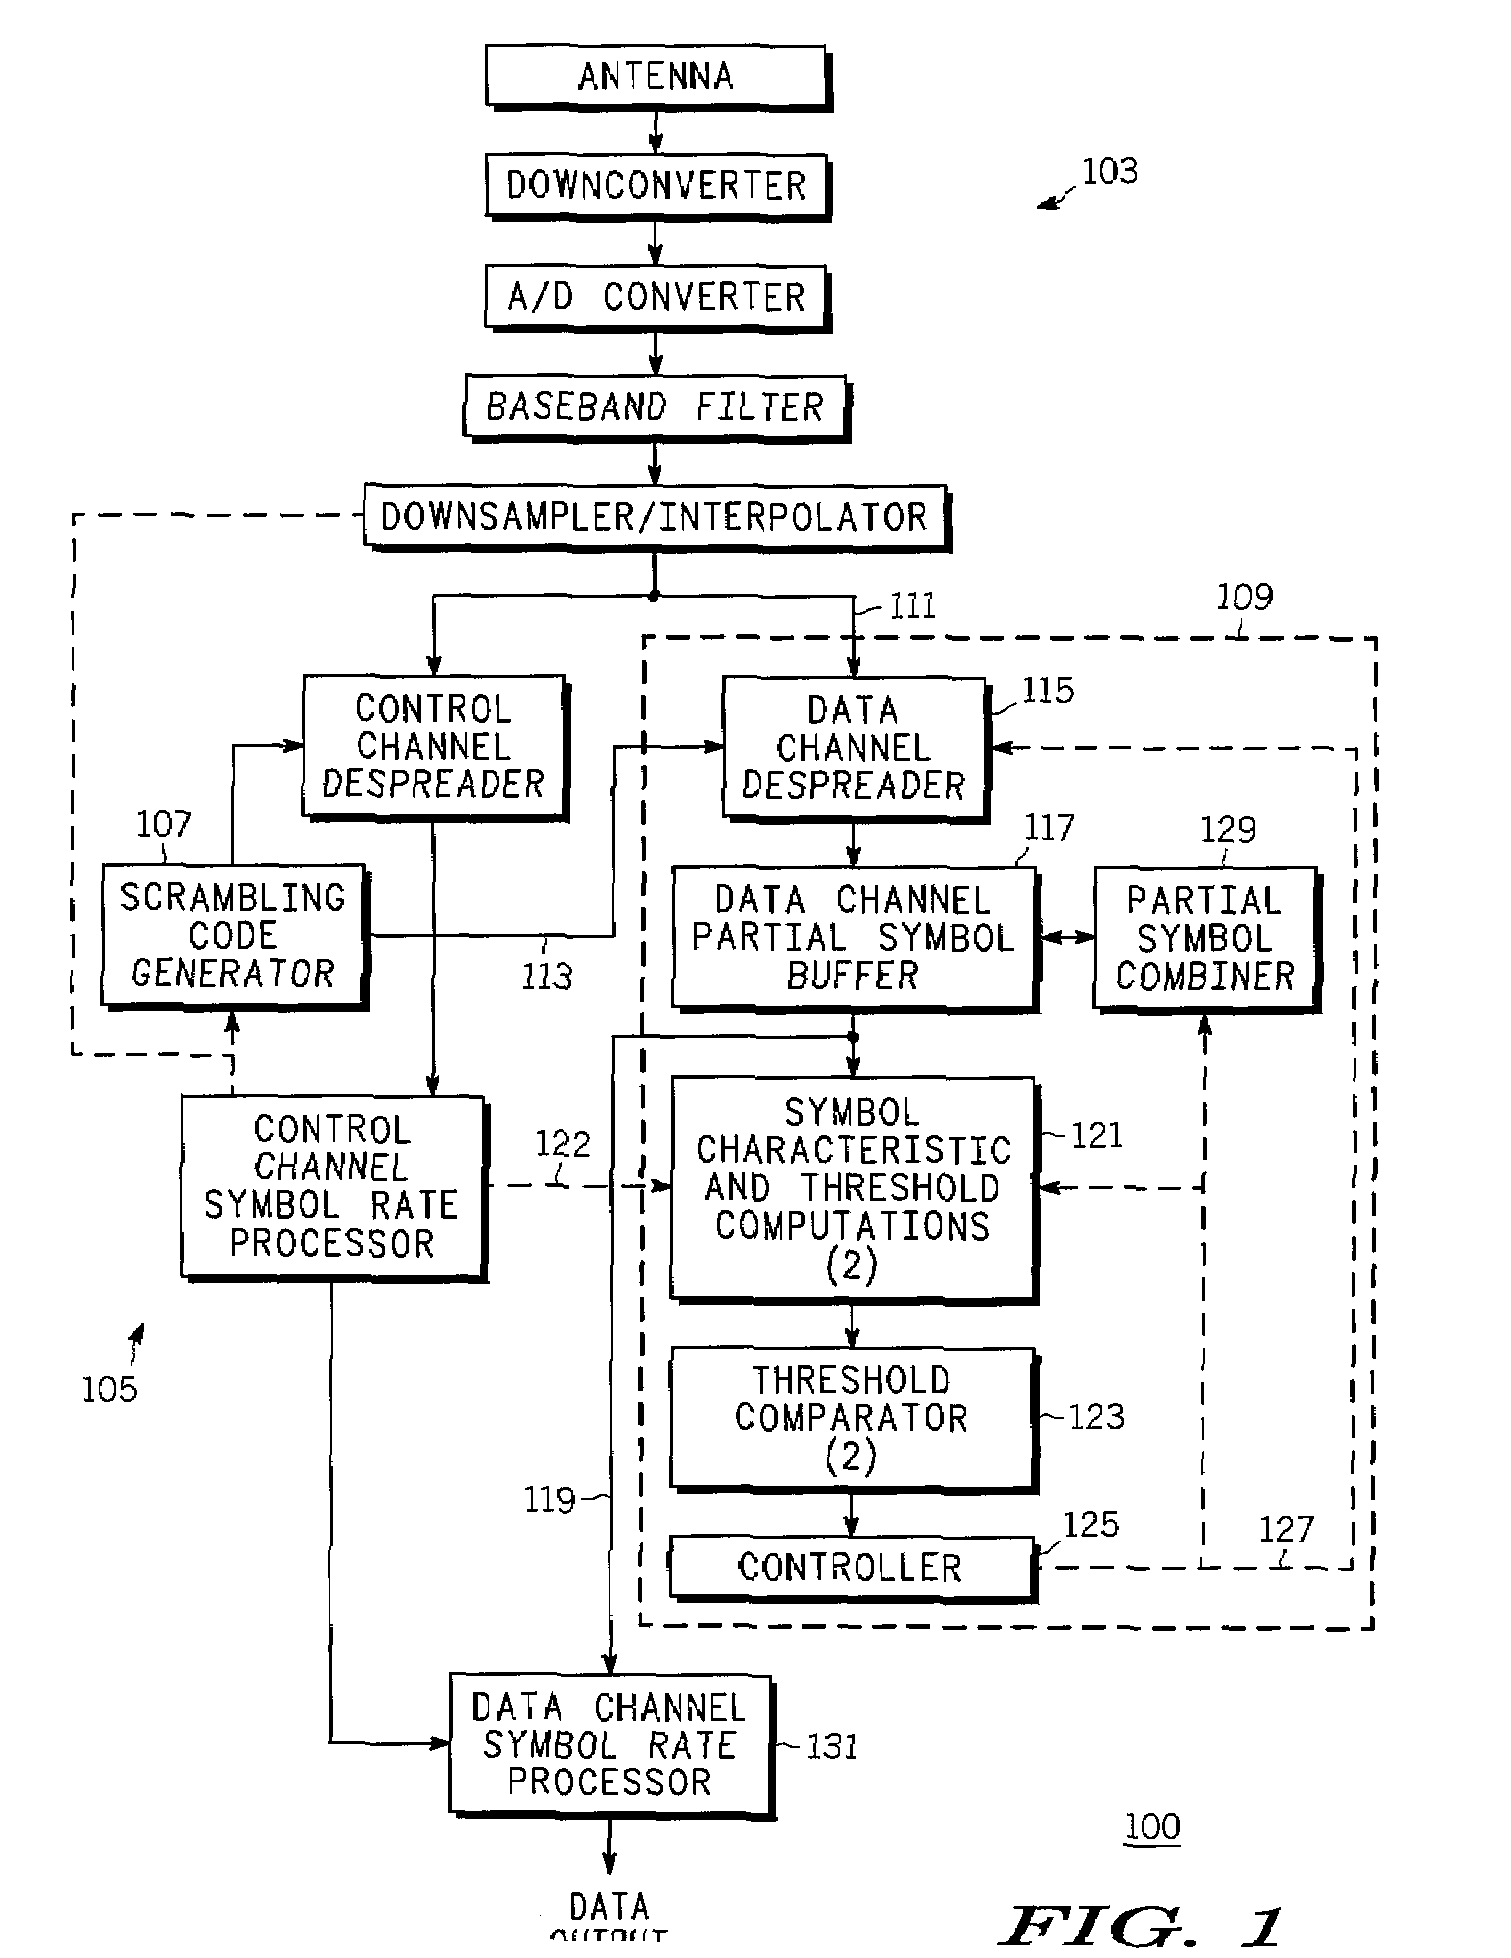 Method and apparatus for determining an upper data rate for a variable data rate signal